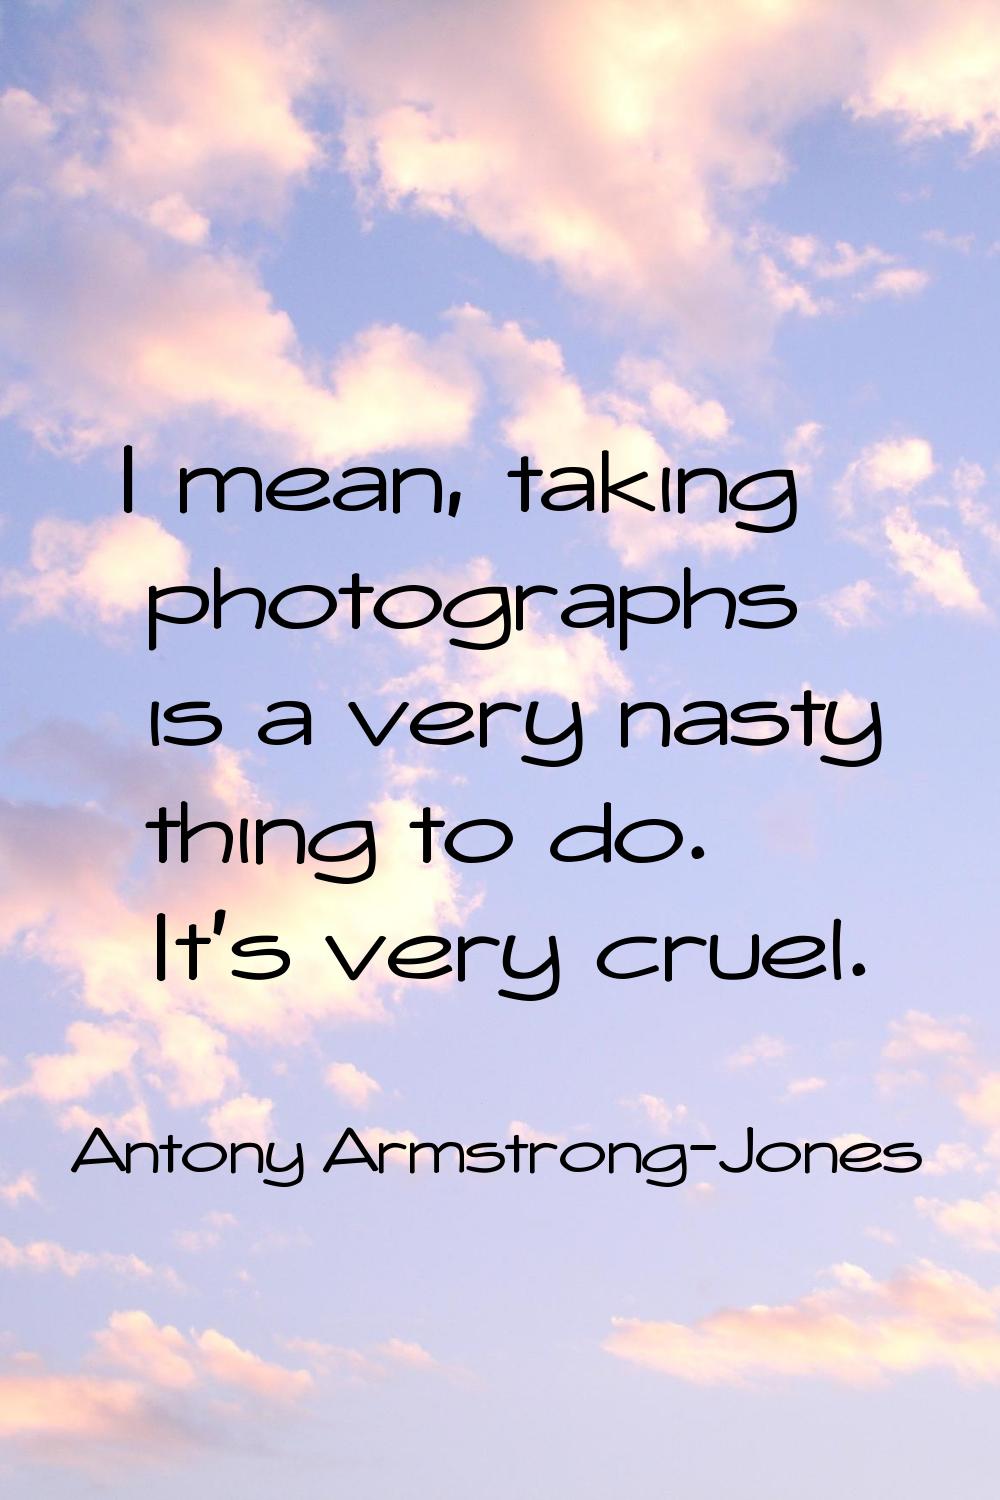 I mean, taking photographs is a very nasty thing to do. It's very cruel.